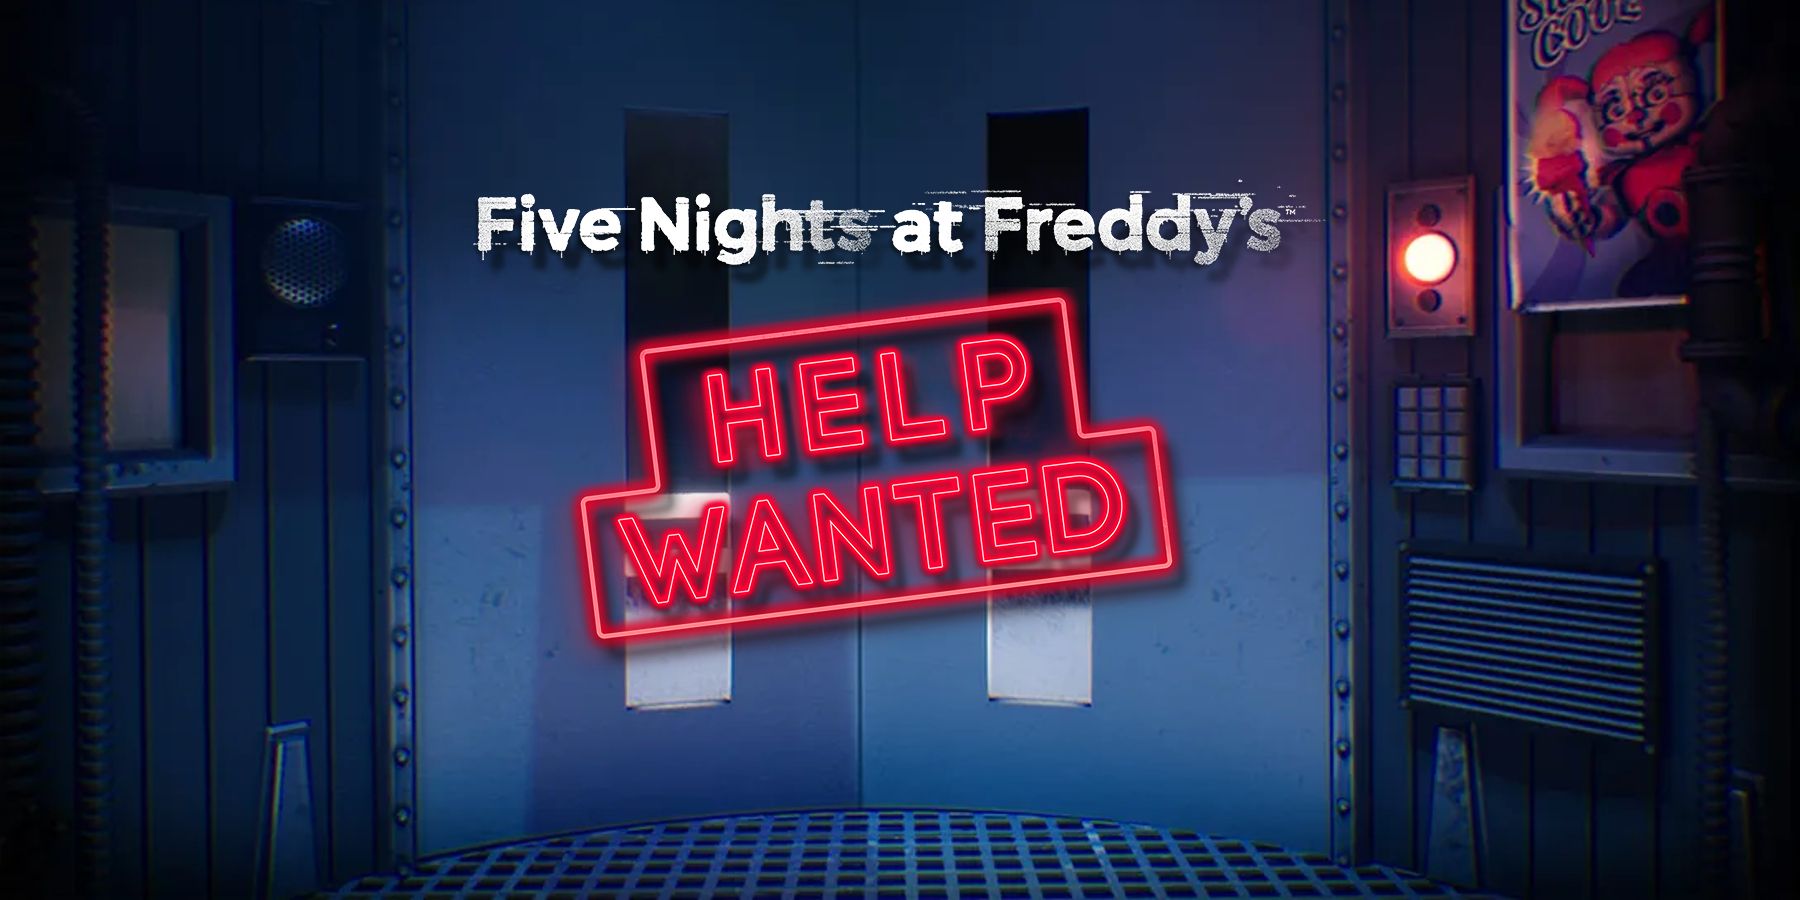 Is Five Nights At Freddy's: Help Wanted 2 the Scariest Game of 2023? 